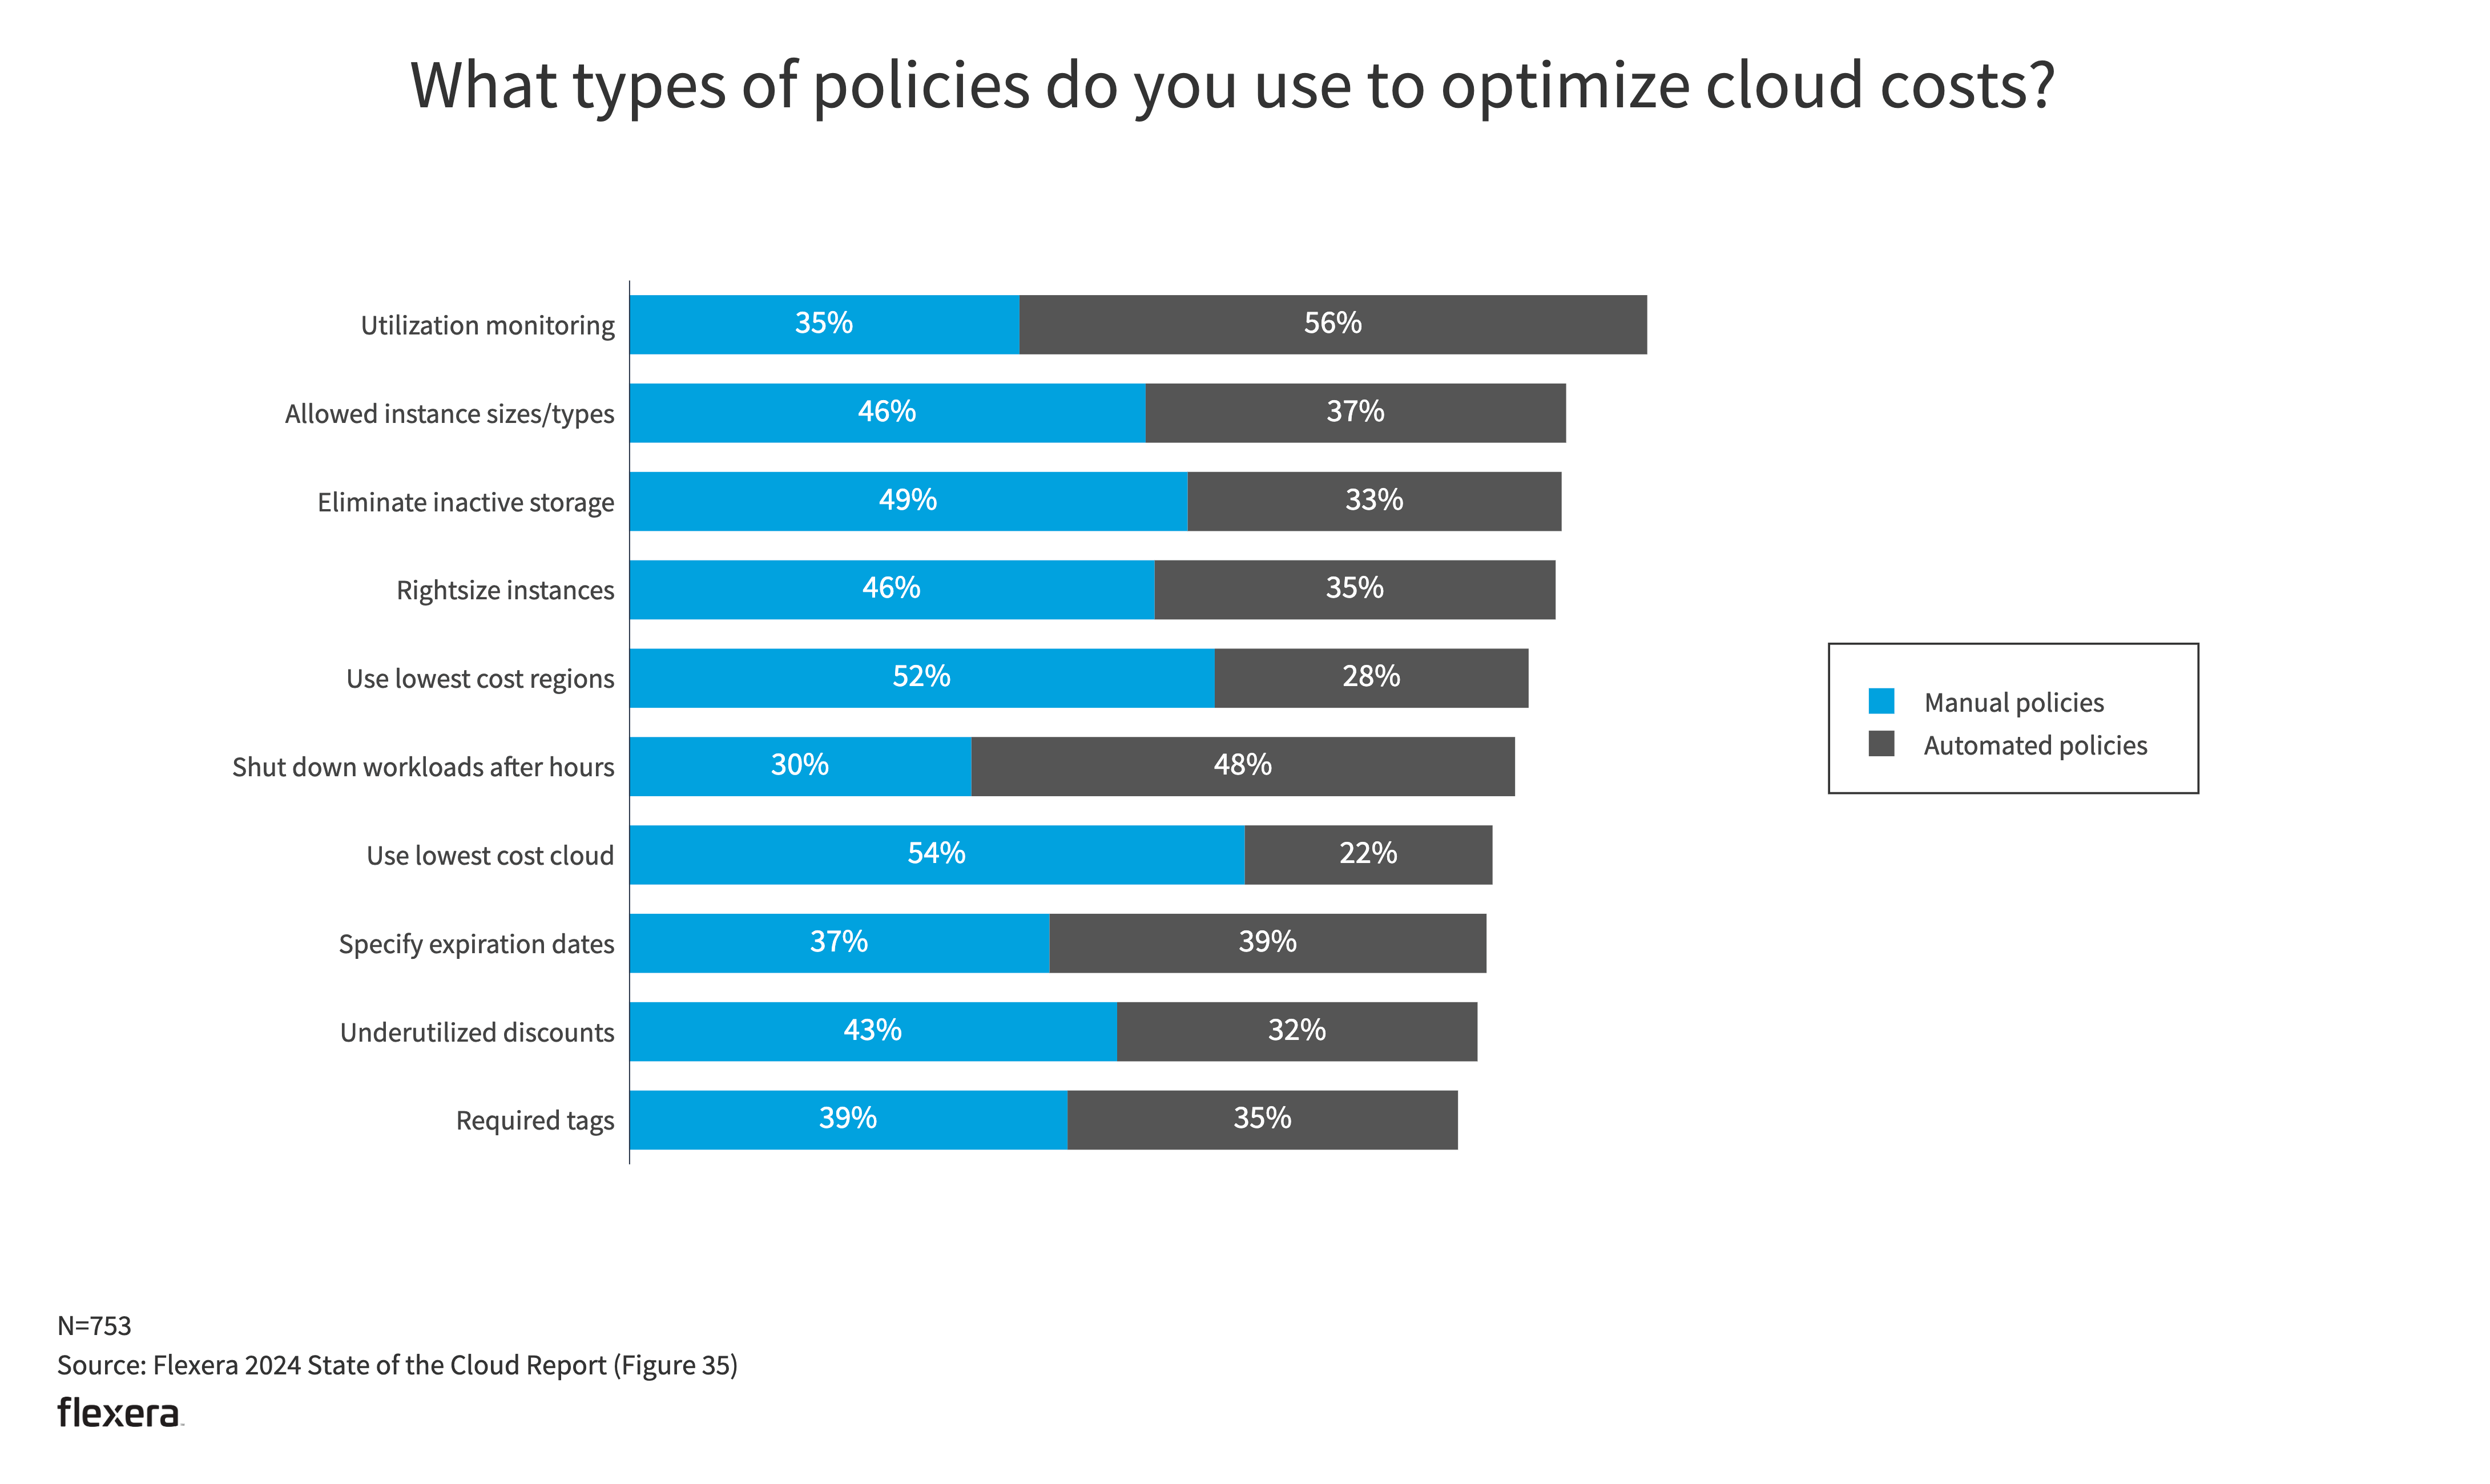 Cloud policies chart from the Flexera 2024 State of the Cloud